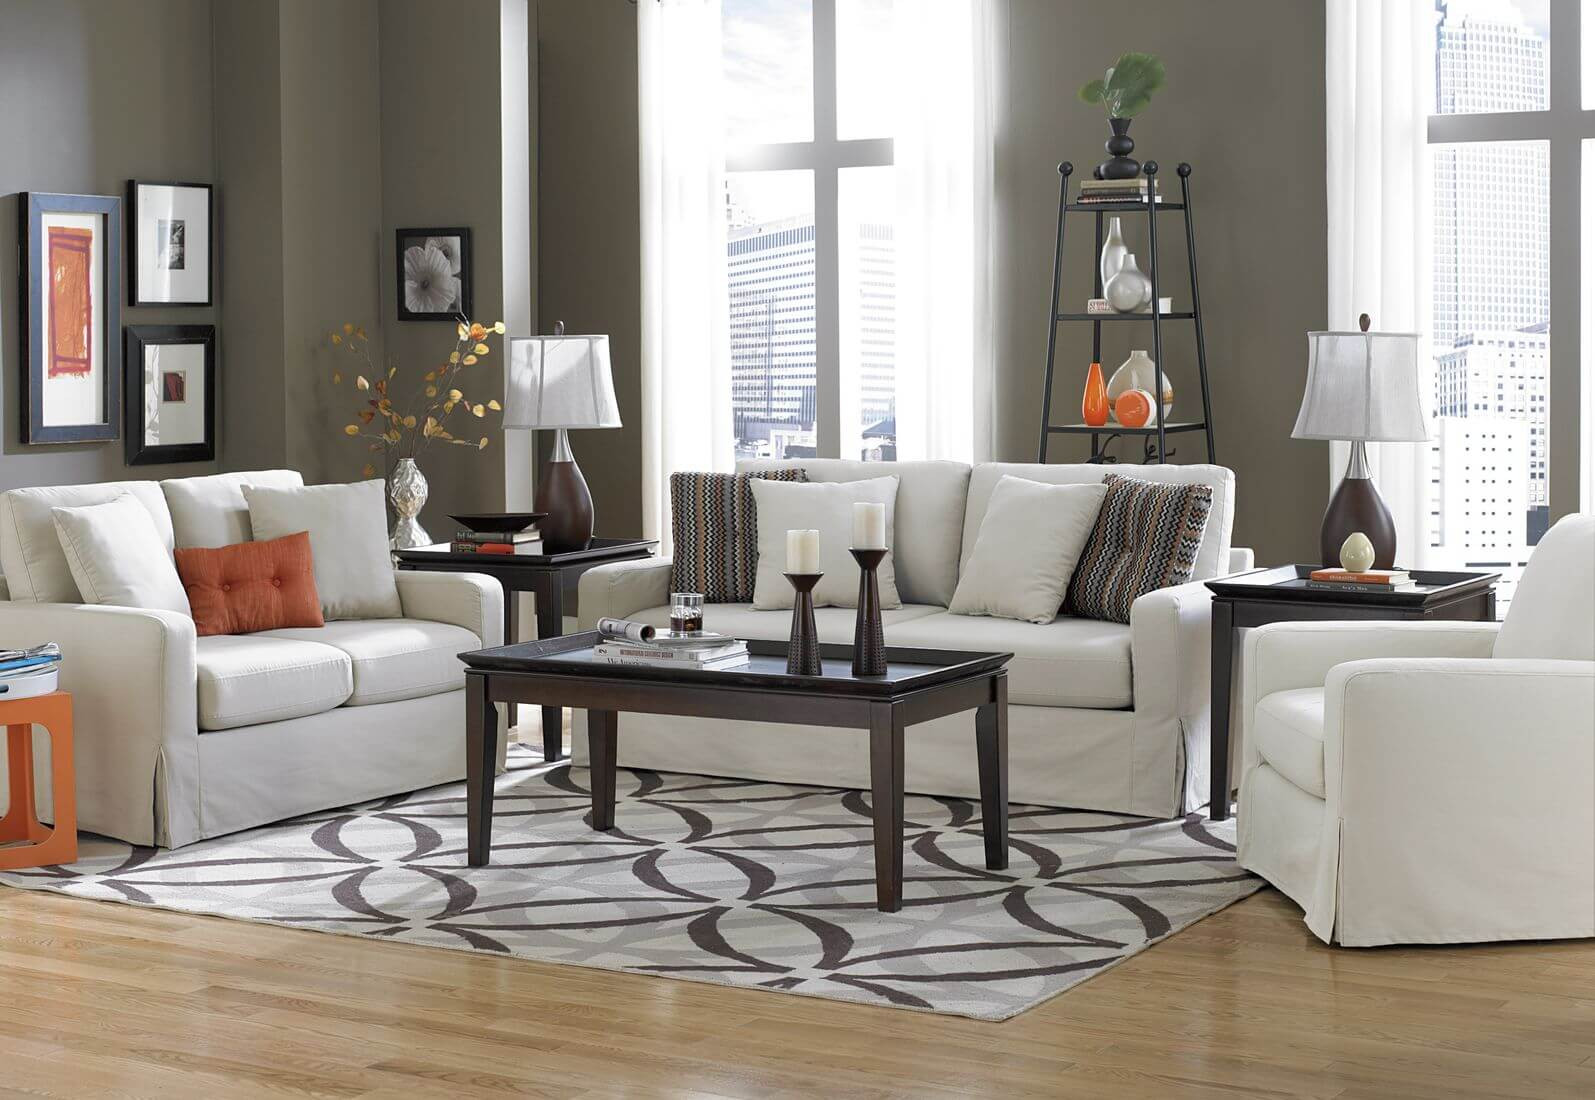 Orange Rugs For Living Room
 40 Living Rooms with Area Rugs for Warmth & Richness